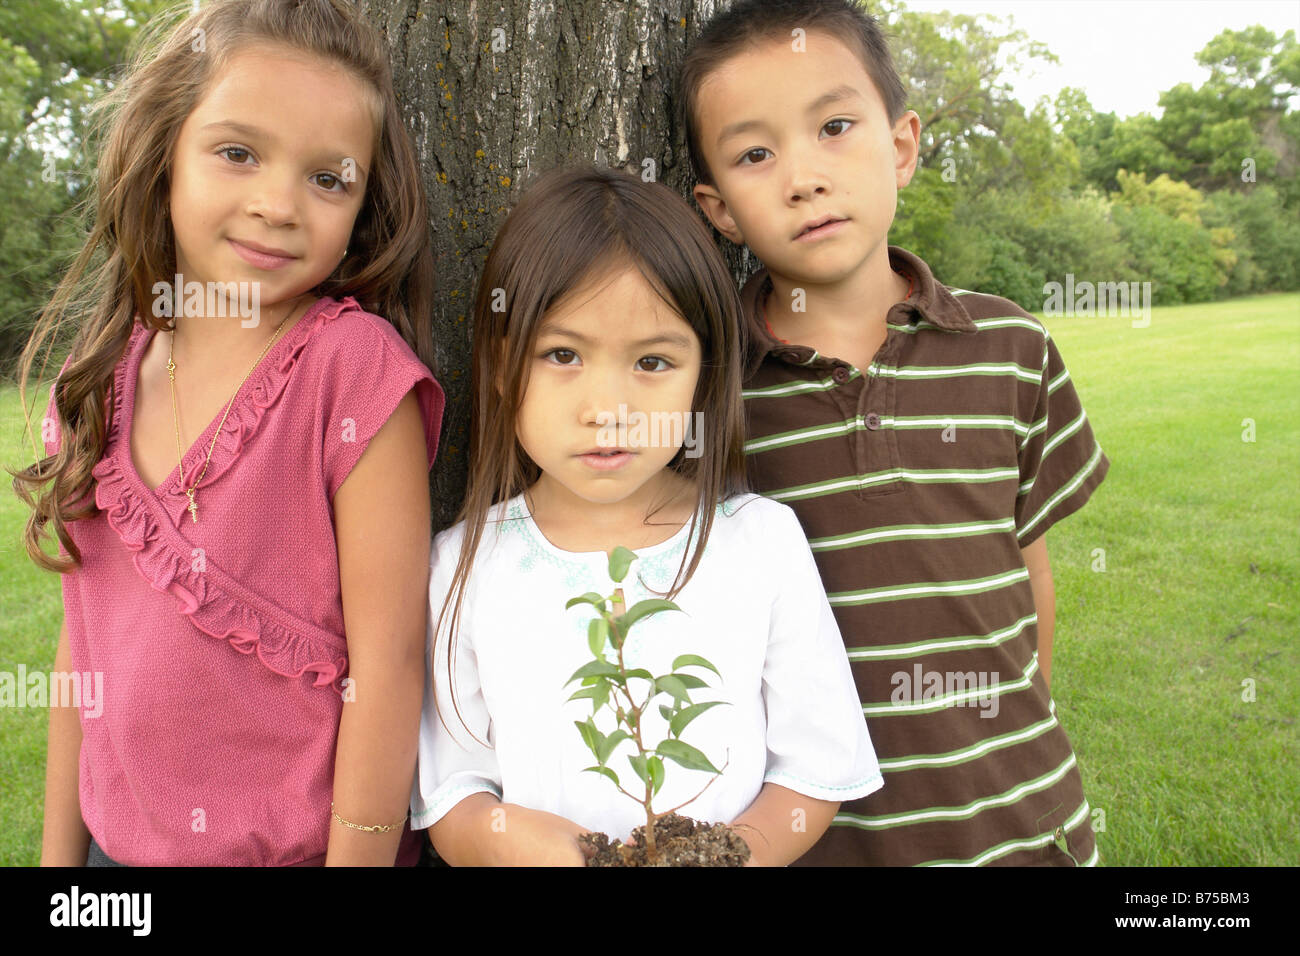 Five year old girl holds small tree, beside seven year old boy and girl, Winnipeg, Canada Stock Photo